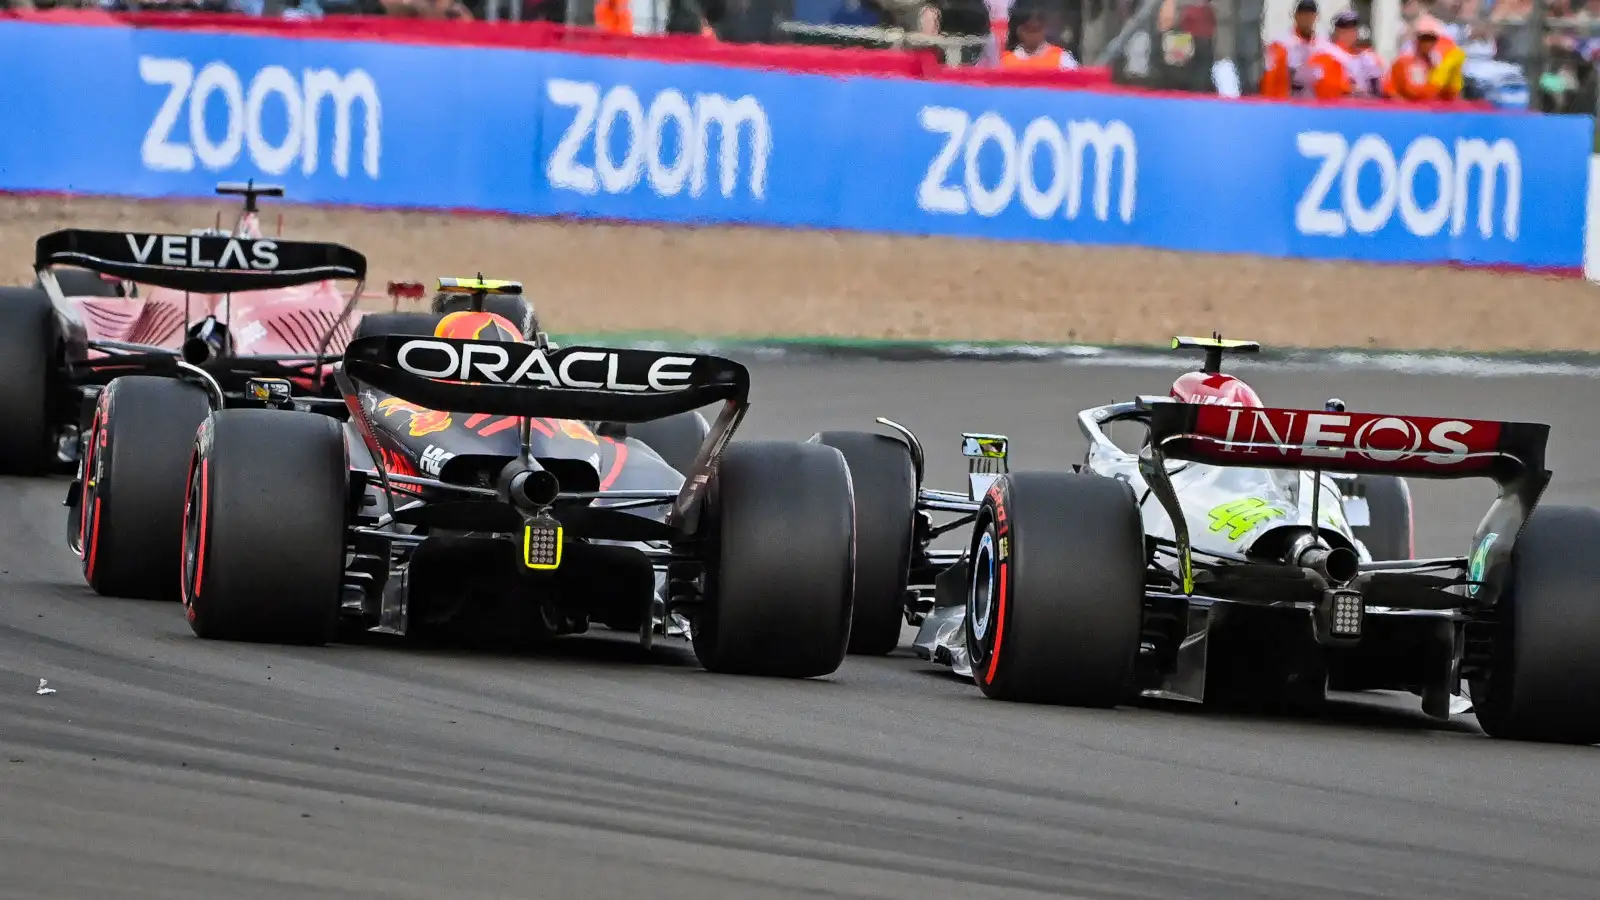 Charles Leclerc trying to defend against Sergio Perez and Lewis Hamilton. Silverstone July 2022